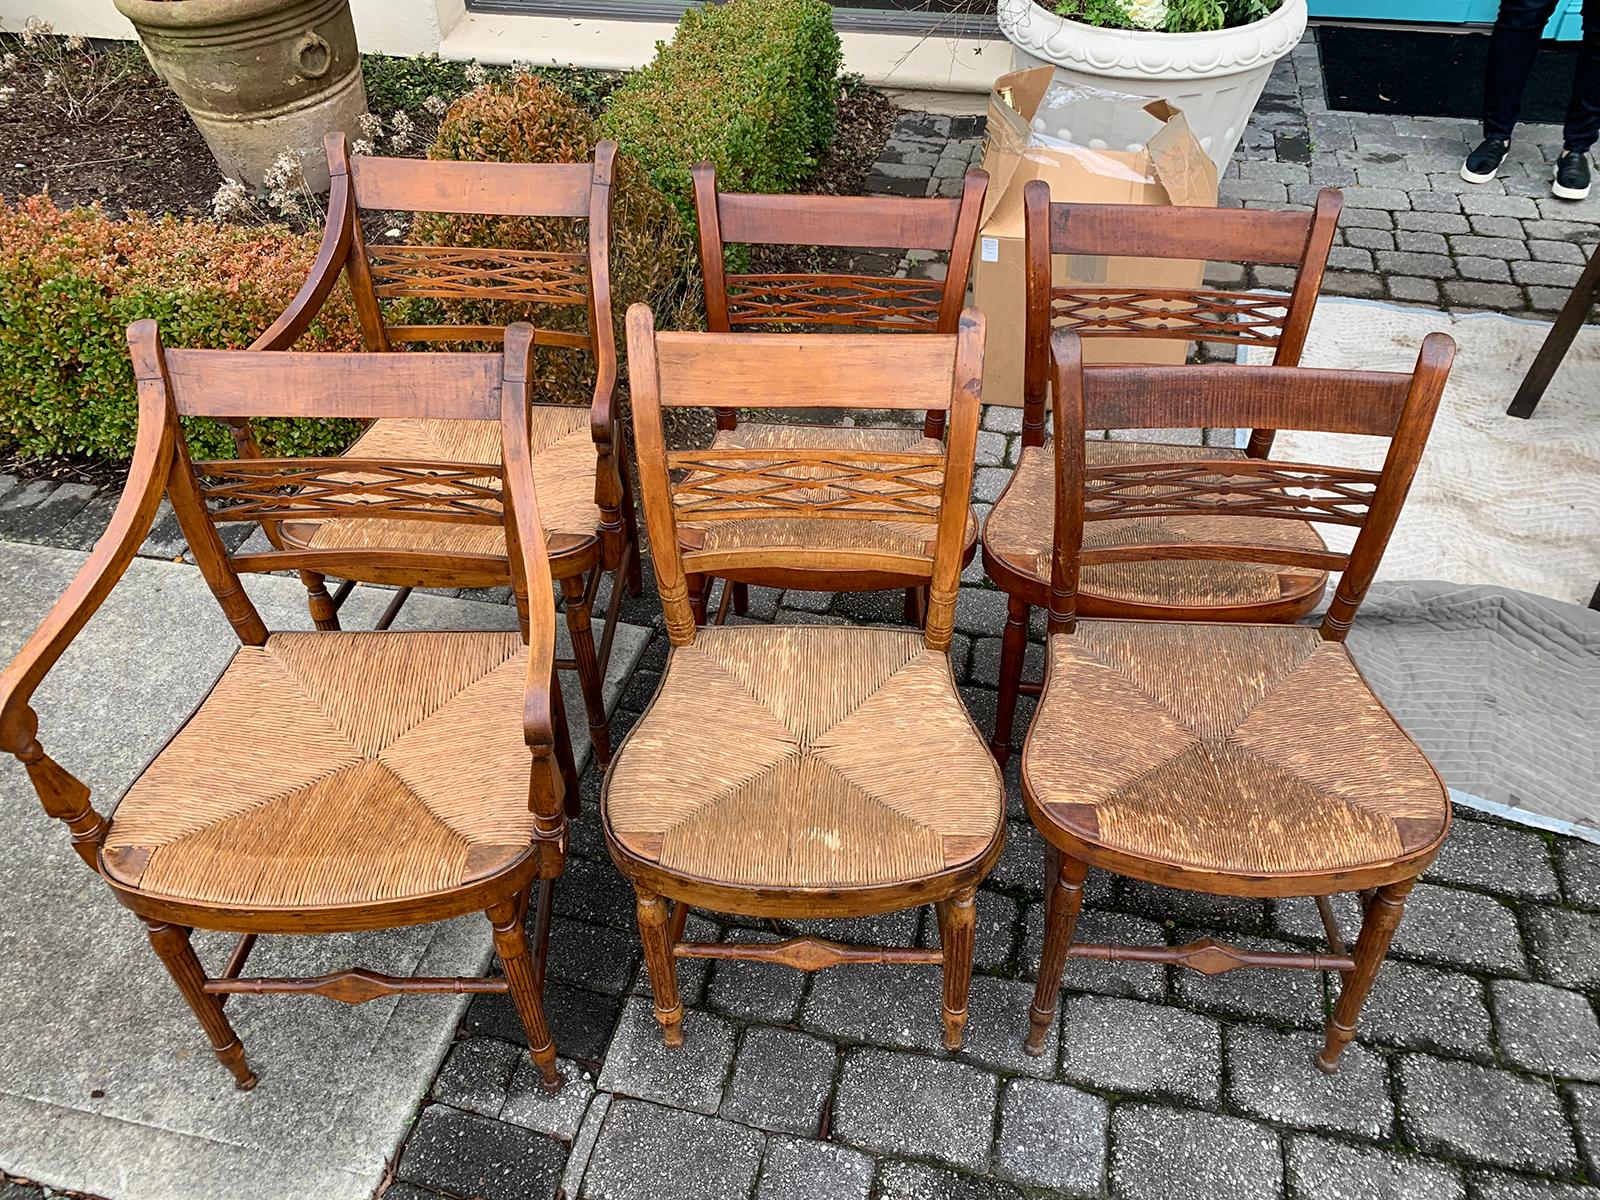 Set of six 19th century American Sheraton maple chairs with rush seats
Two arms, four sides
Measures: Sides: 18.75